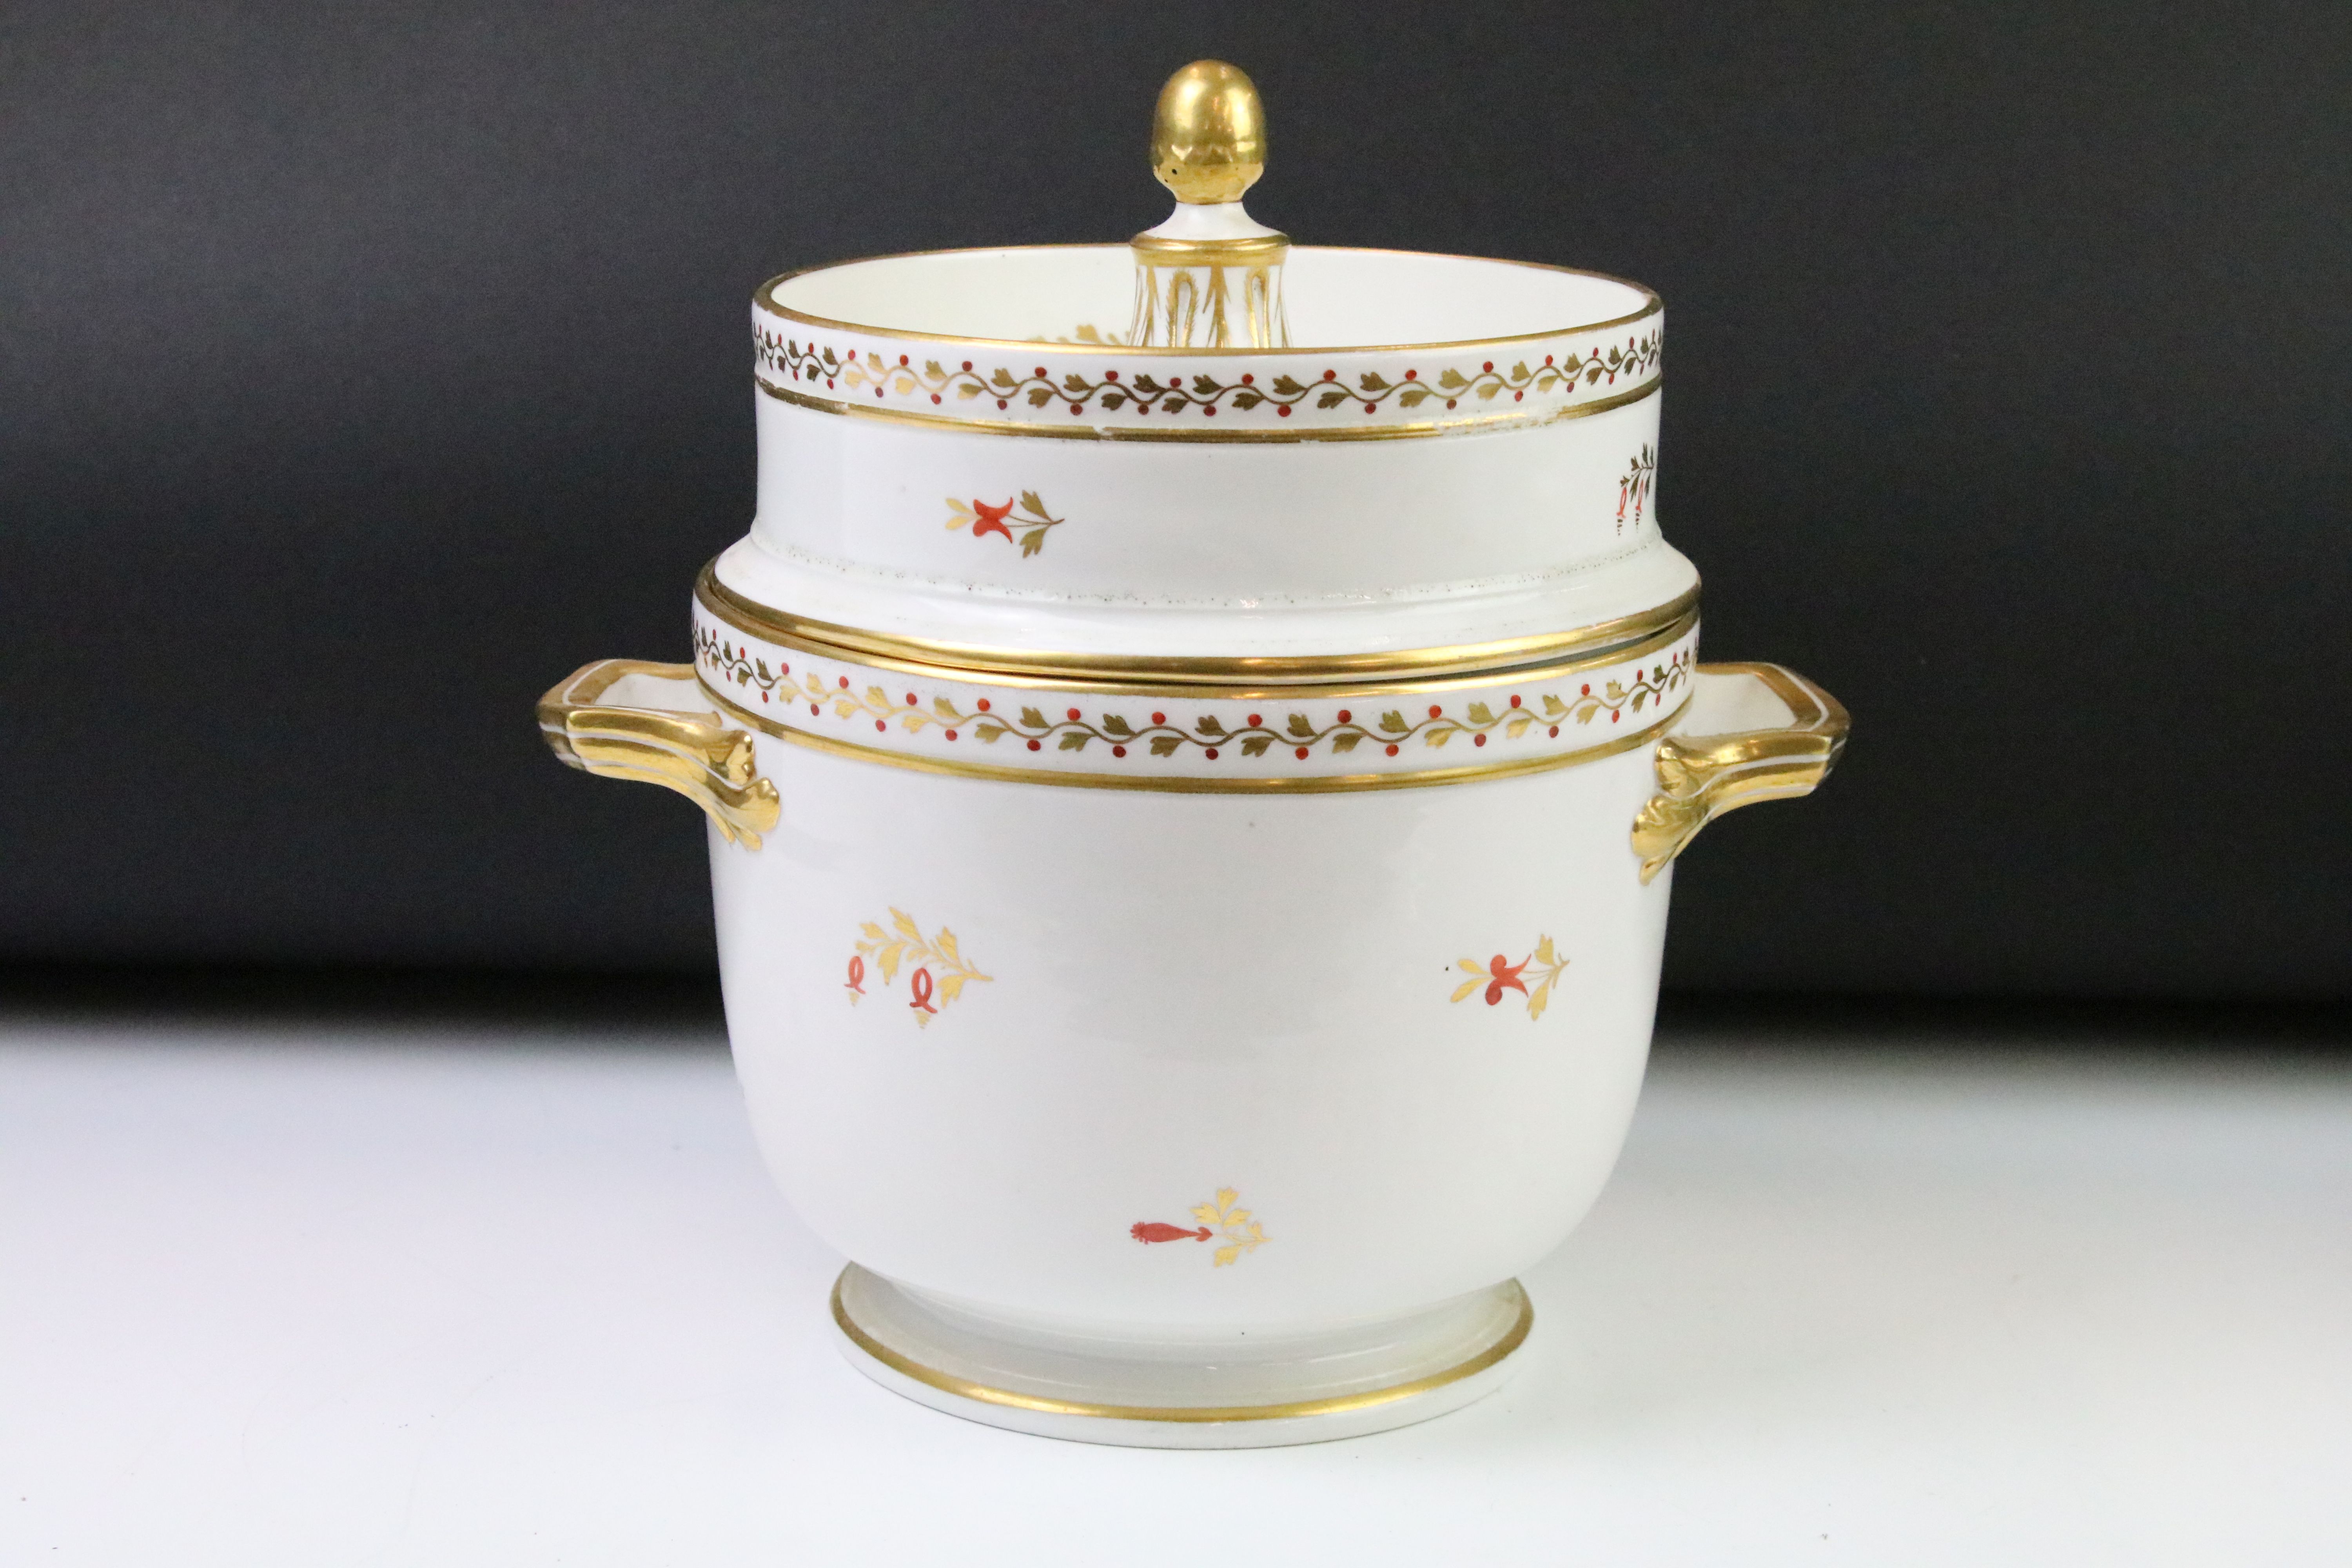 Late 18th / early 19th Century Crown Derby ice pail and cover having twin handles, gilt detailing of - Image 4 of 6